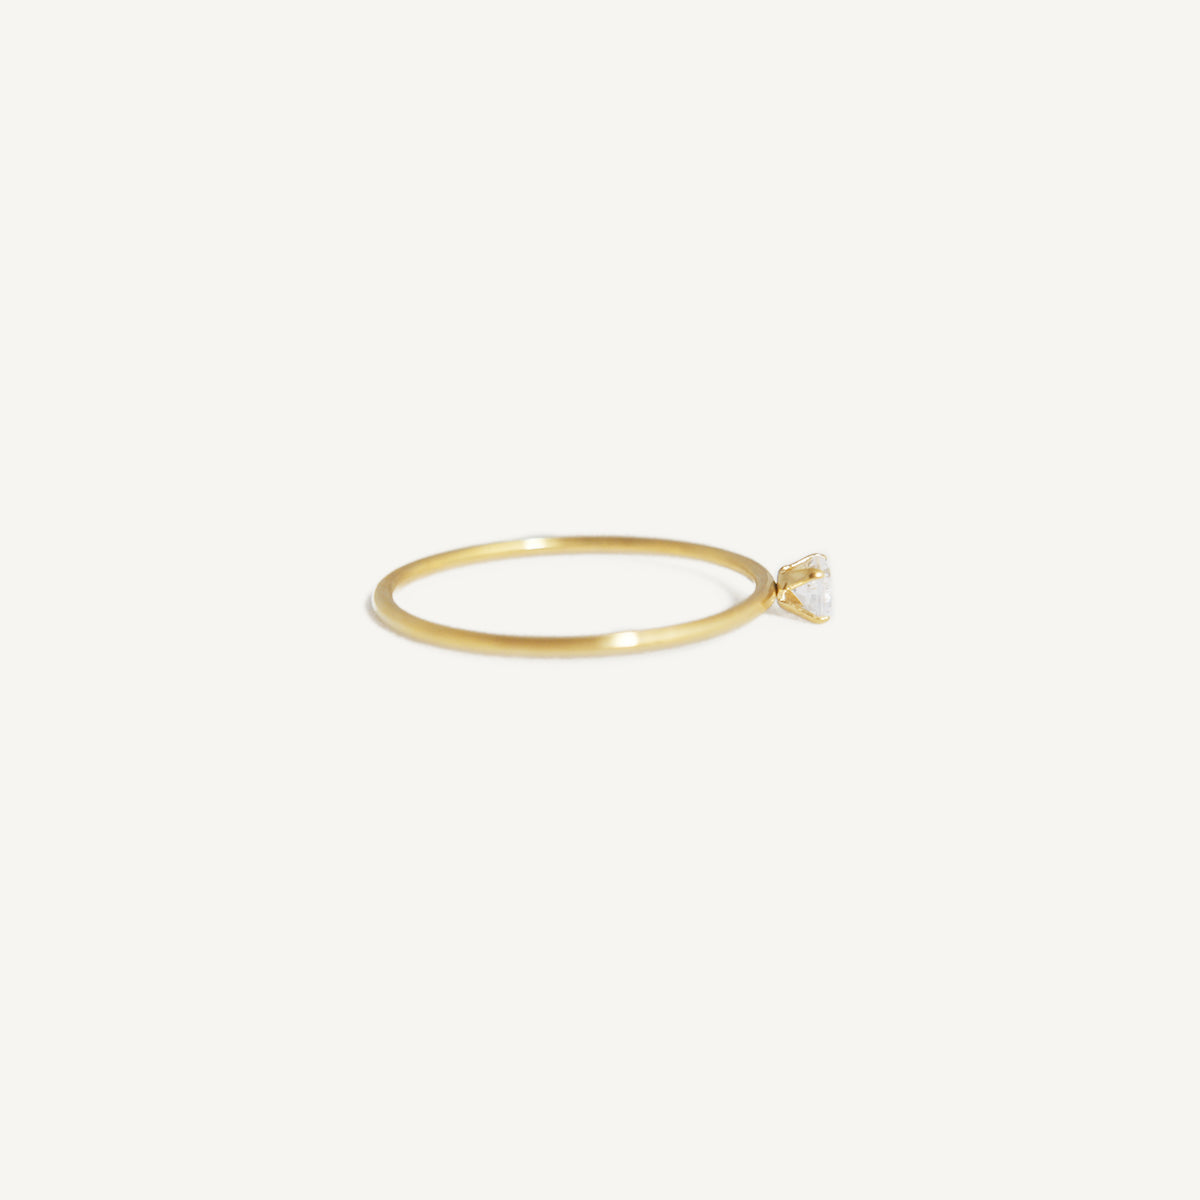 The Skinny Solitaire Ring